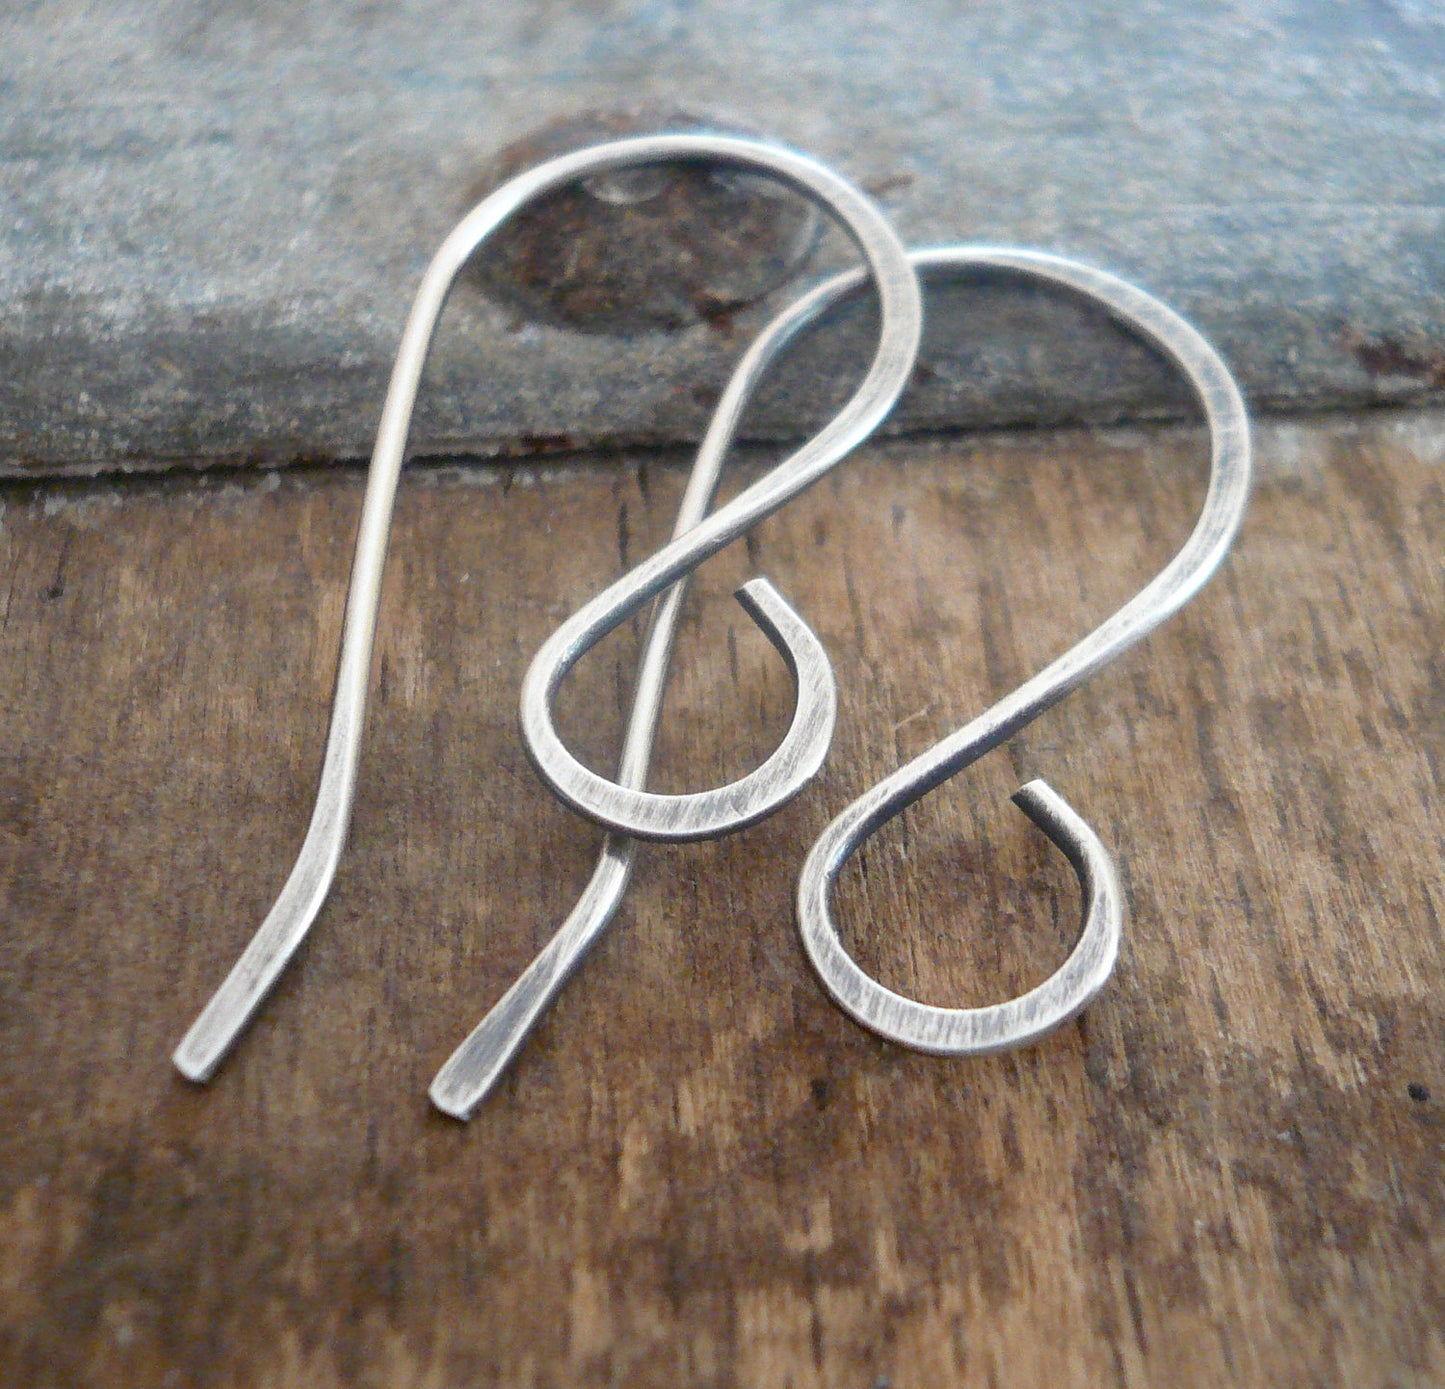 12 Pairs of my Large Loop Solitaire Sterling Silver Earwires - Handmade. Handforged. Oxidized & Polished